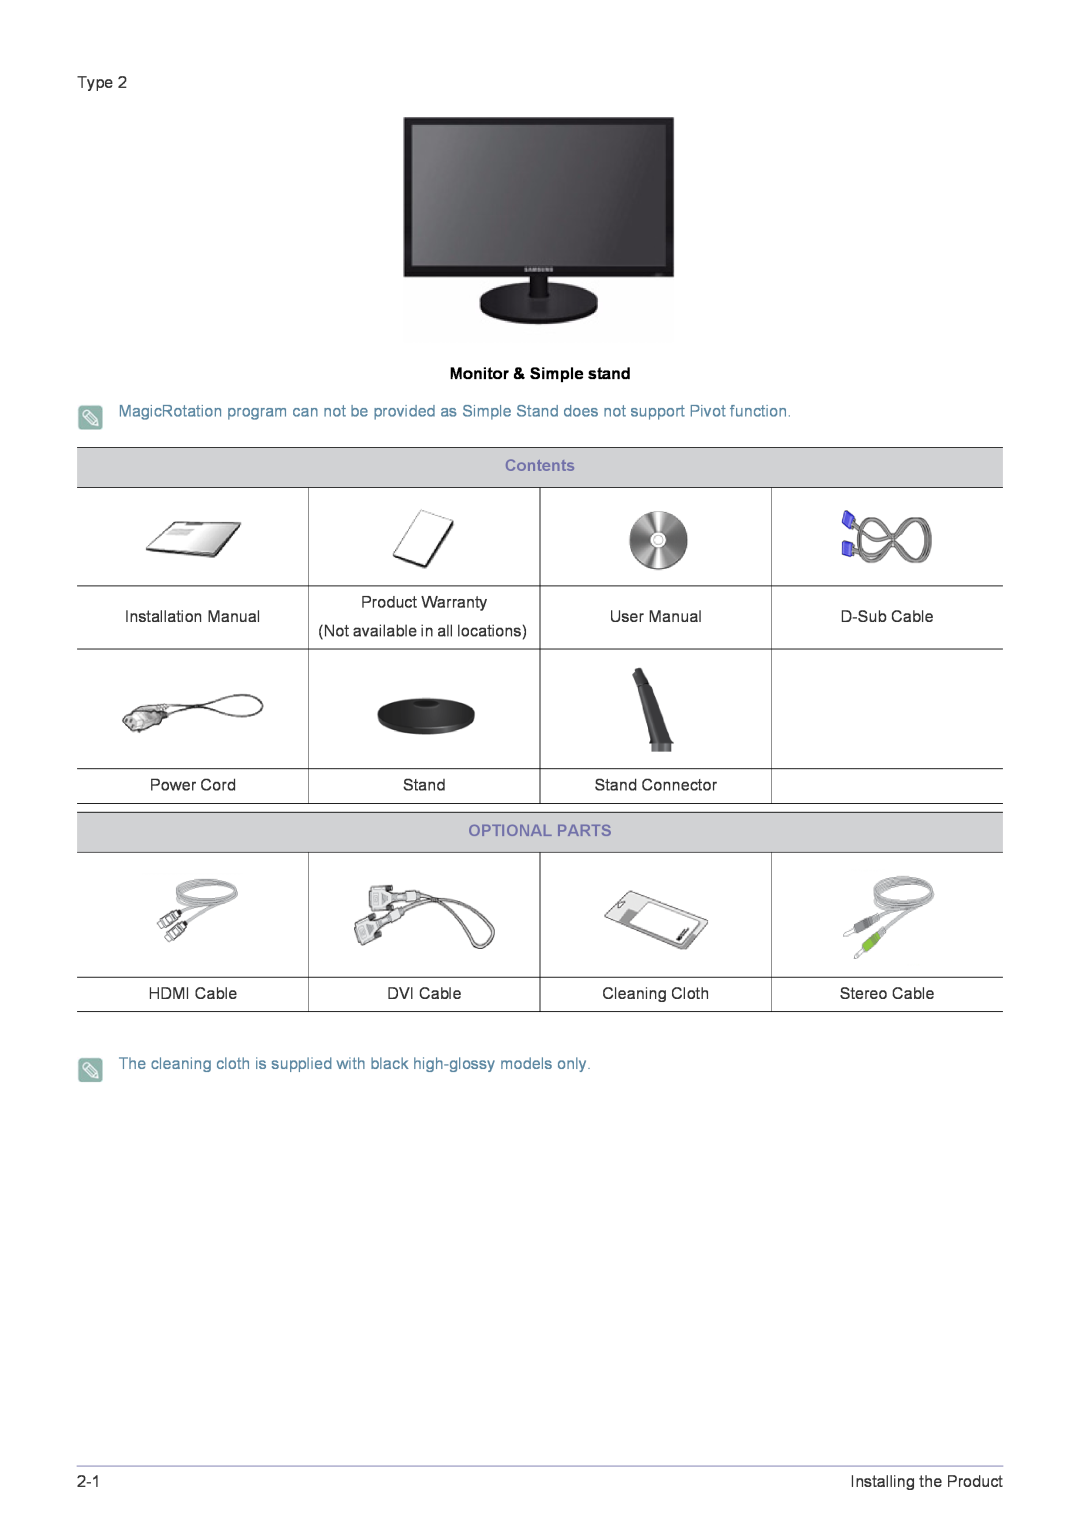 Samsung B1940MX, E1920R, E1920NWX, E1920NX, BX2440, BX2240, B2240WX, B2240MW Monitor & Simple stand, Contents, Optional Parts 